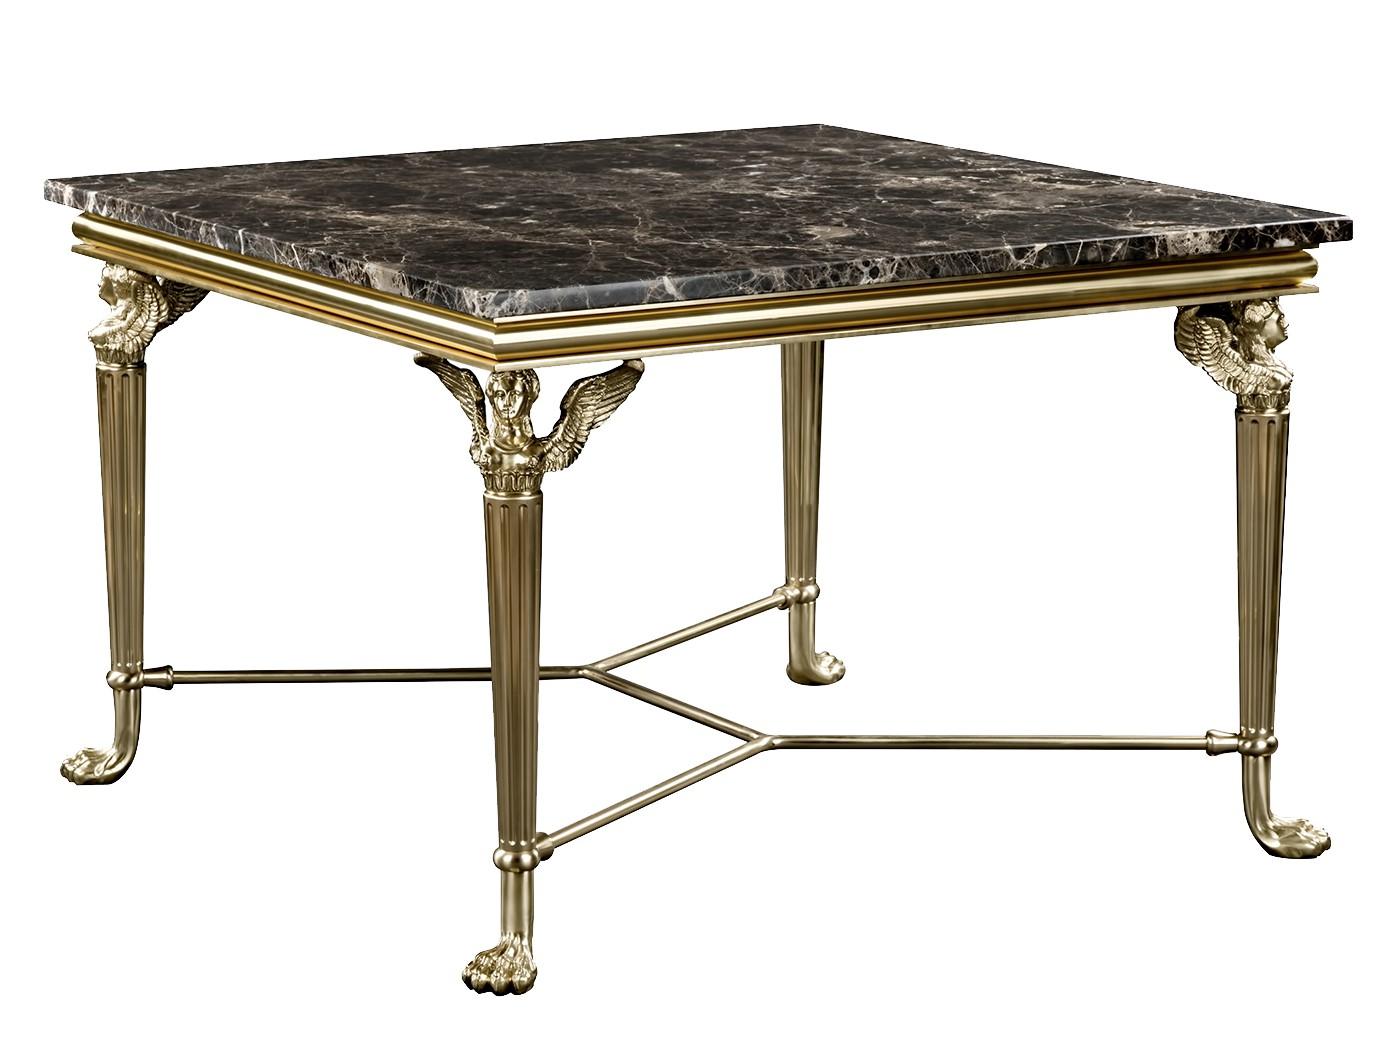 This superb table exemplifies Badari's philosophy of merging tradition and functionality while stressing the quality of the materials used. Inspired by neoclassic designs, this piece features four tapered pad legs with an upper winged sphinx decor